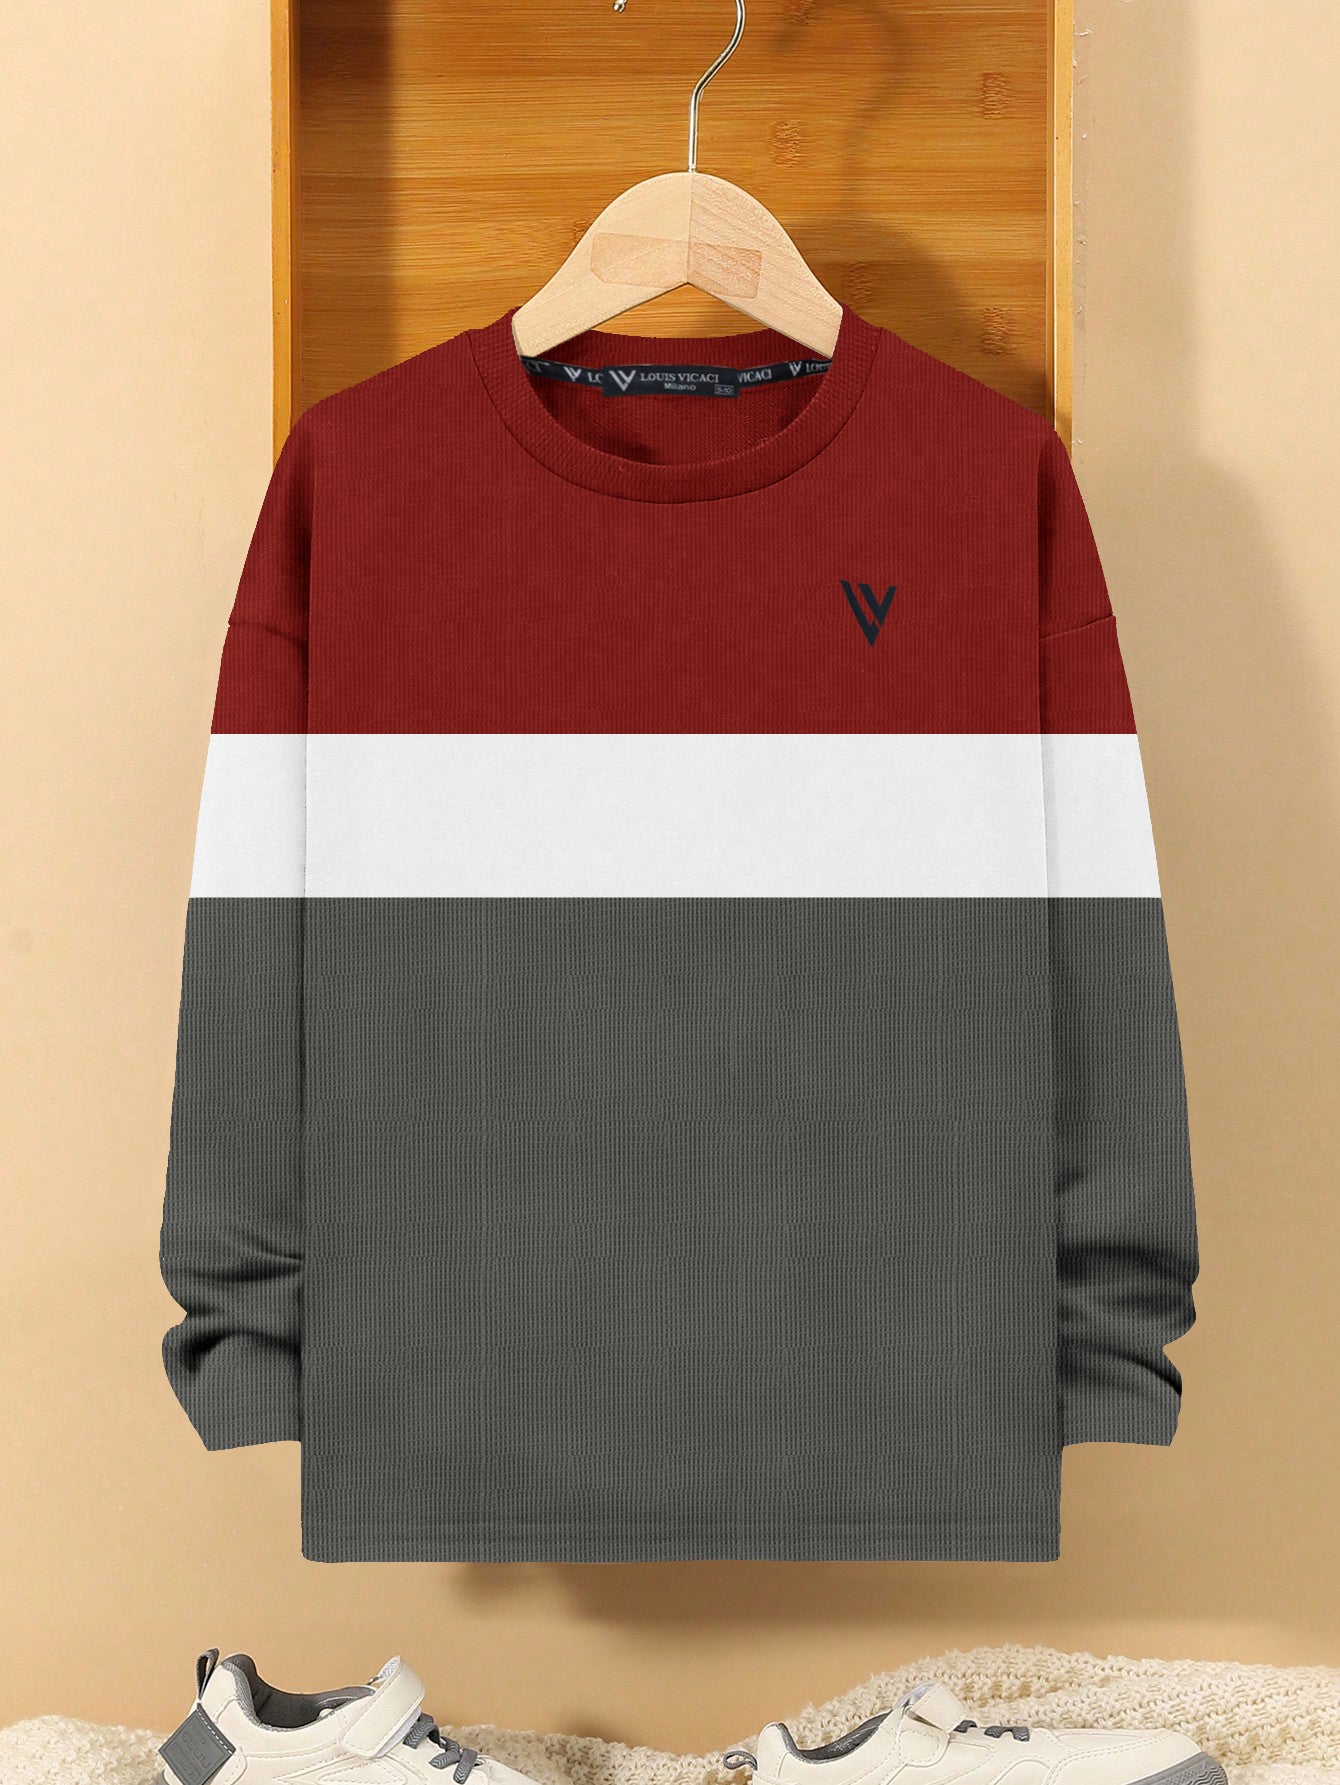 LV Crew Neck Long Sleeve Thermal Tee Shirt For Kids-Red with White & Grey-SP1719/RT2423